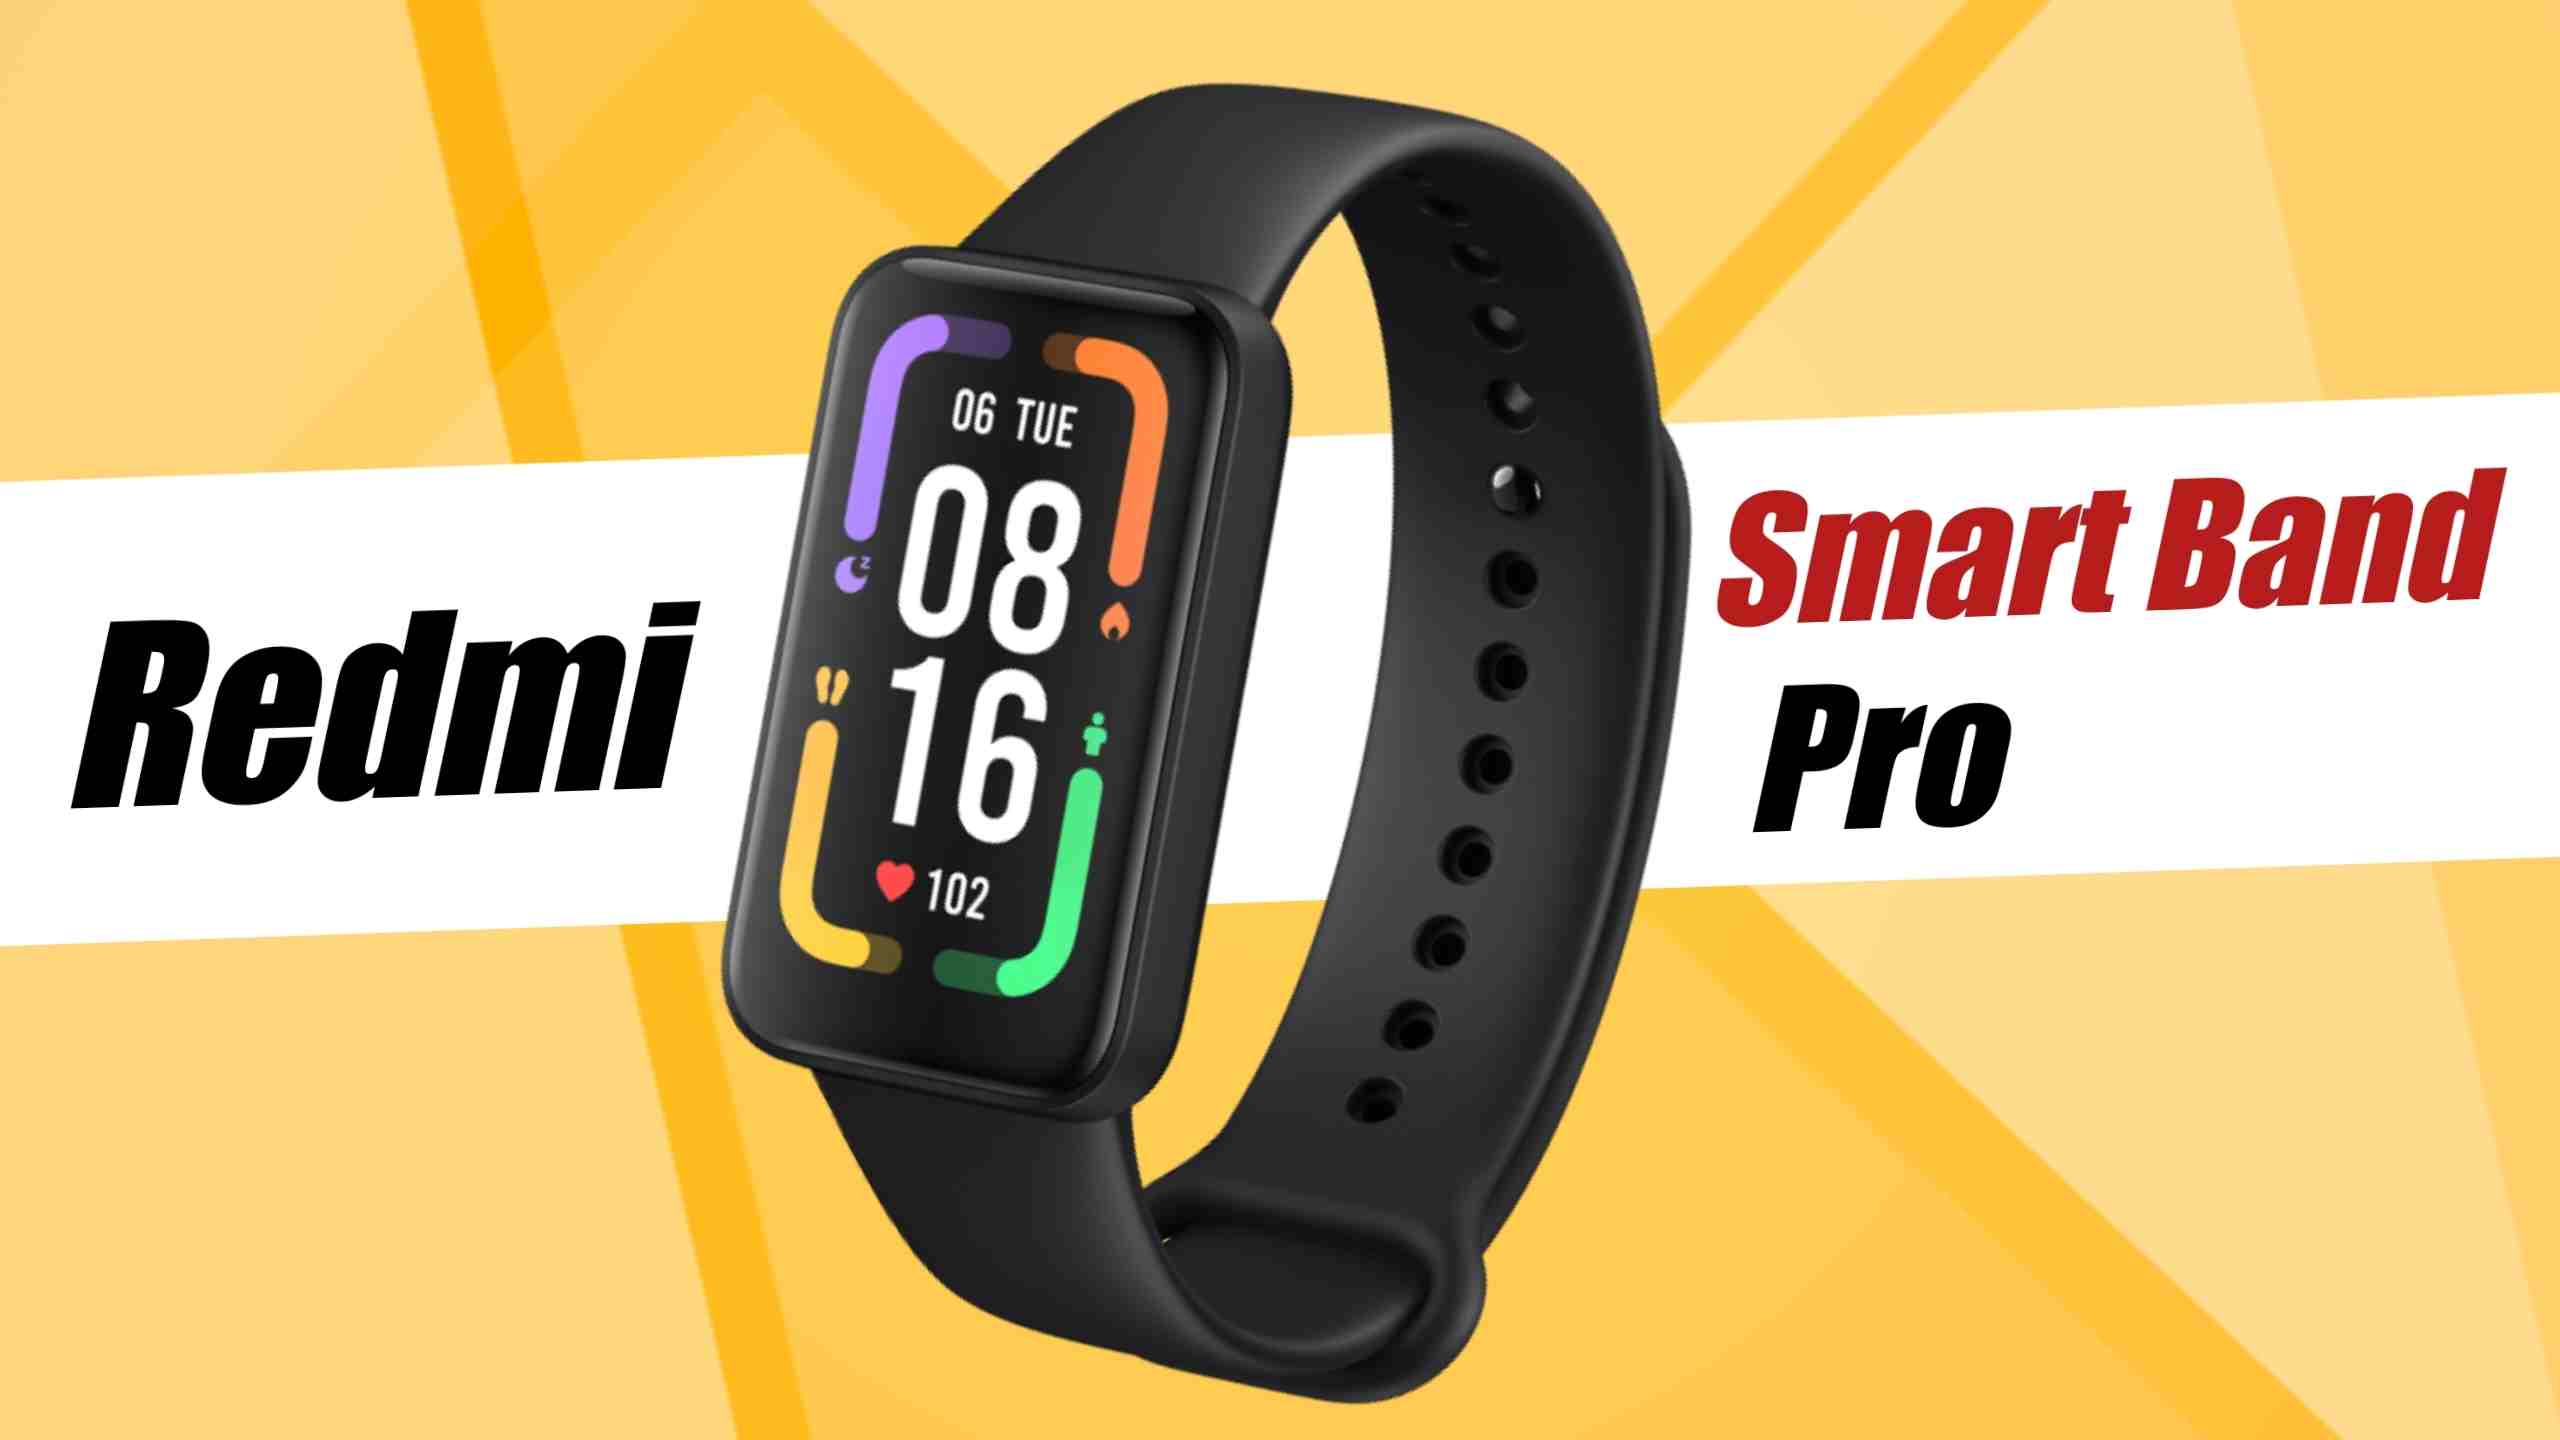 Redmi Smart Band Pro with 110+ sport modes, up to 14 days battery life launched in India: Price, Specifications